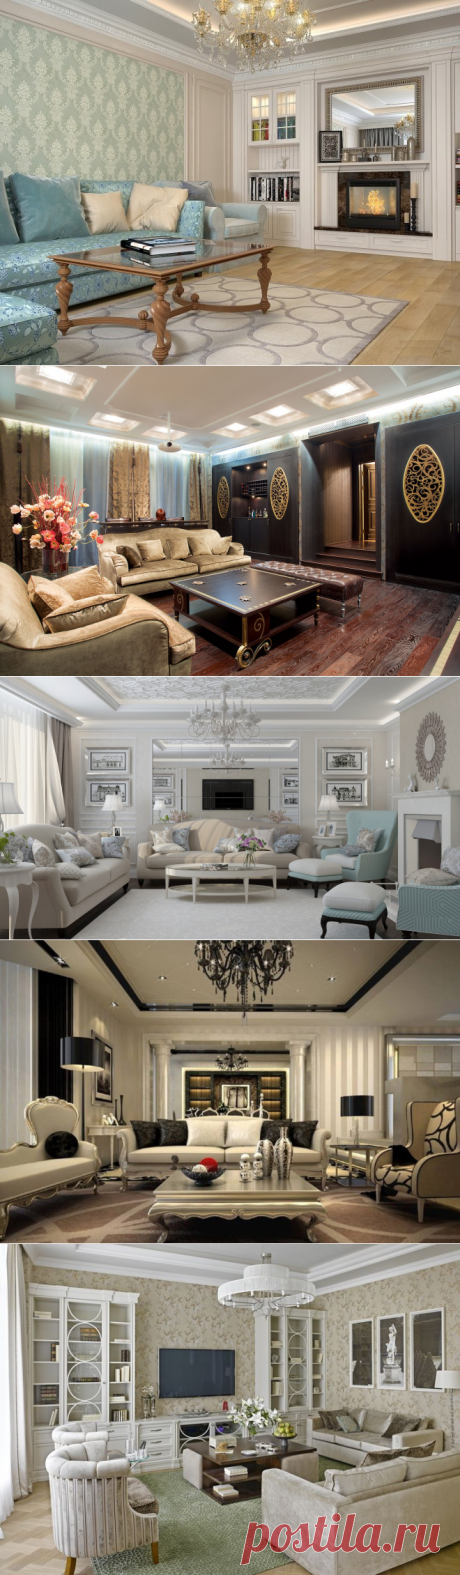 The Neoclassical Style in the Living Room | Interior Design Pictures